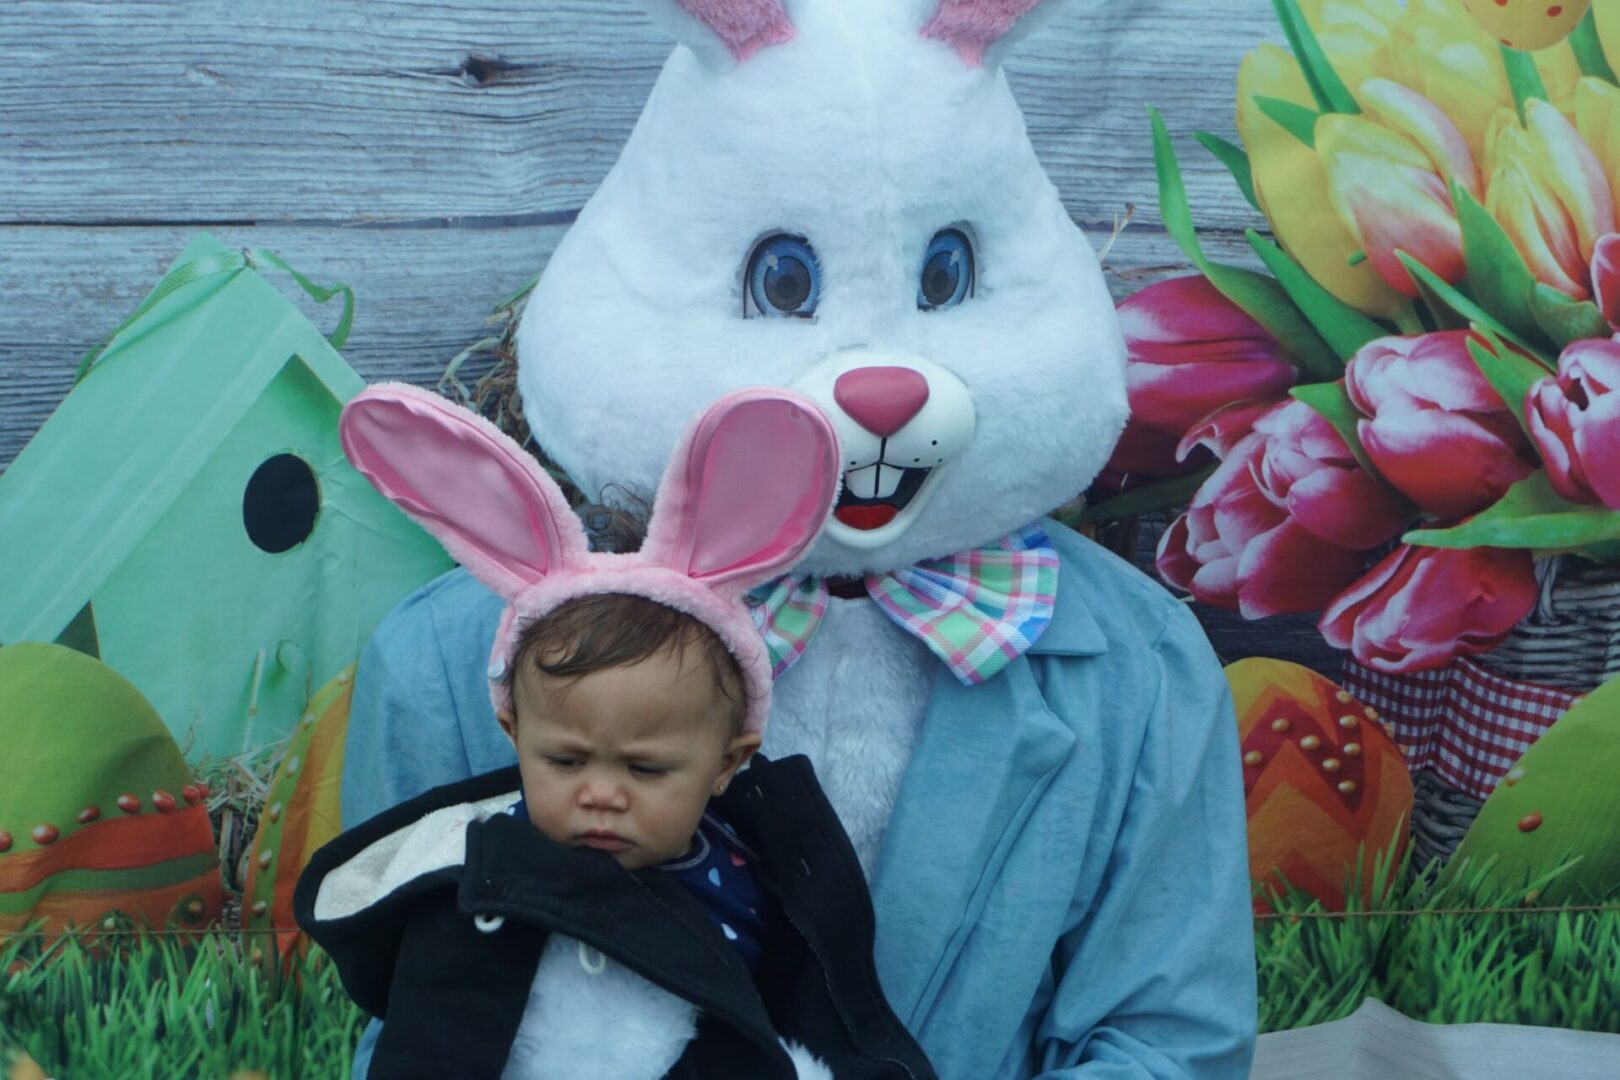 The bunny mascot holding a baby with bunny ears